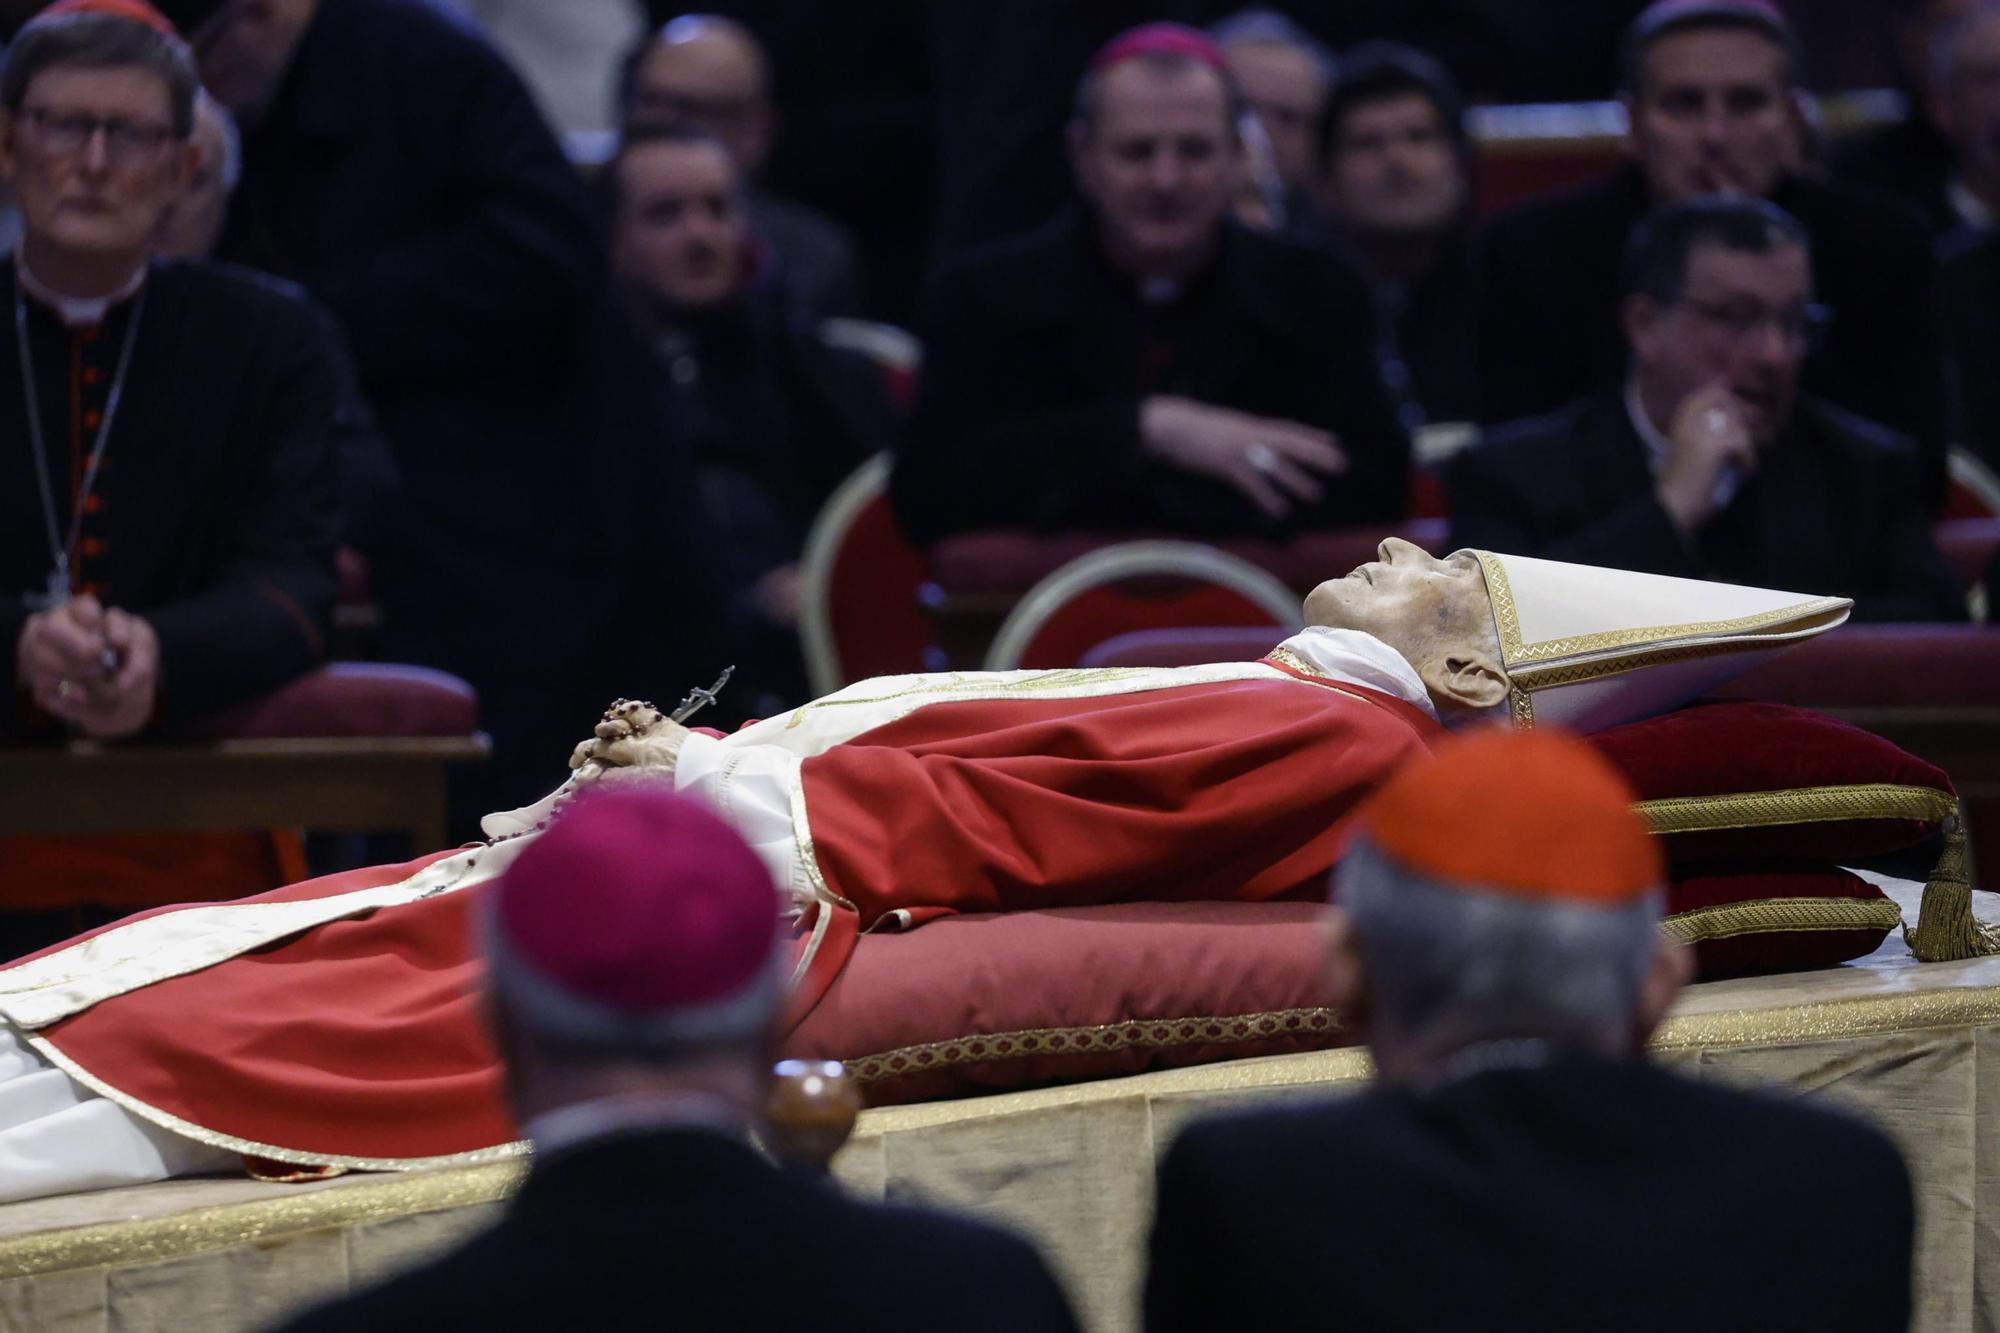 Pope Emeritus Benedict XVI's body lies in state in St. Peter's Basilica for public viewing